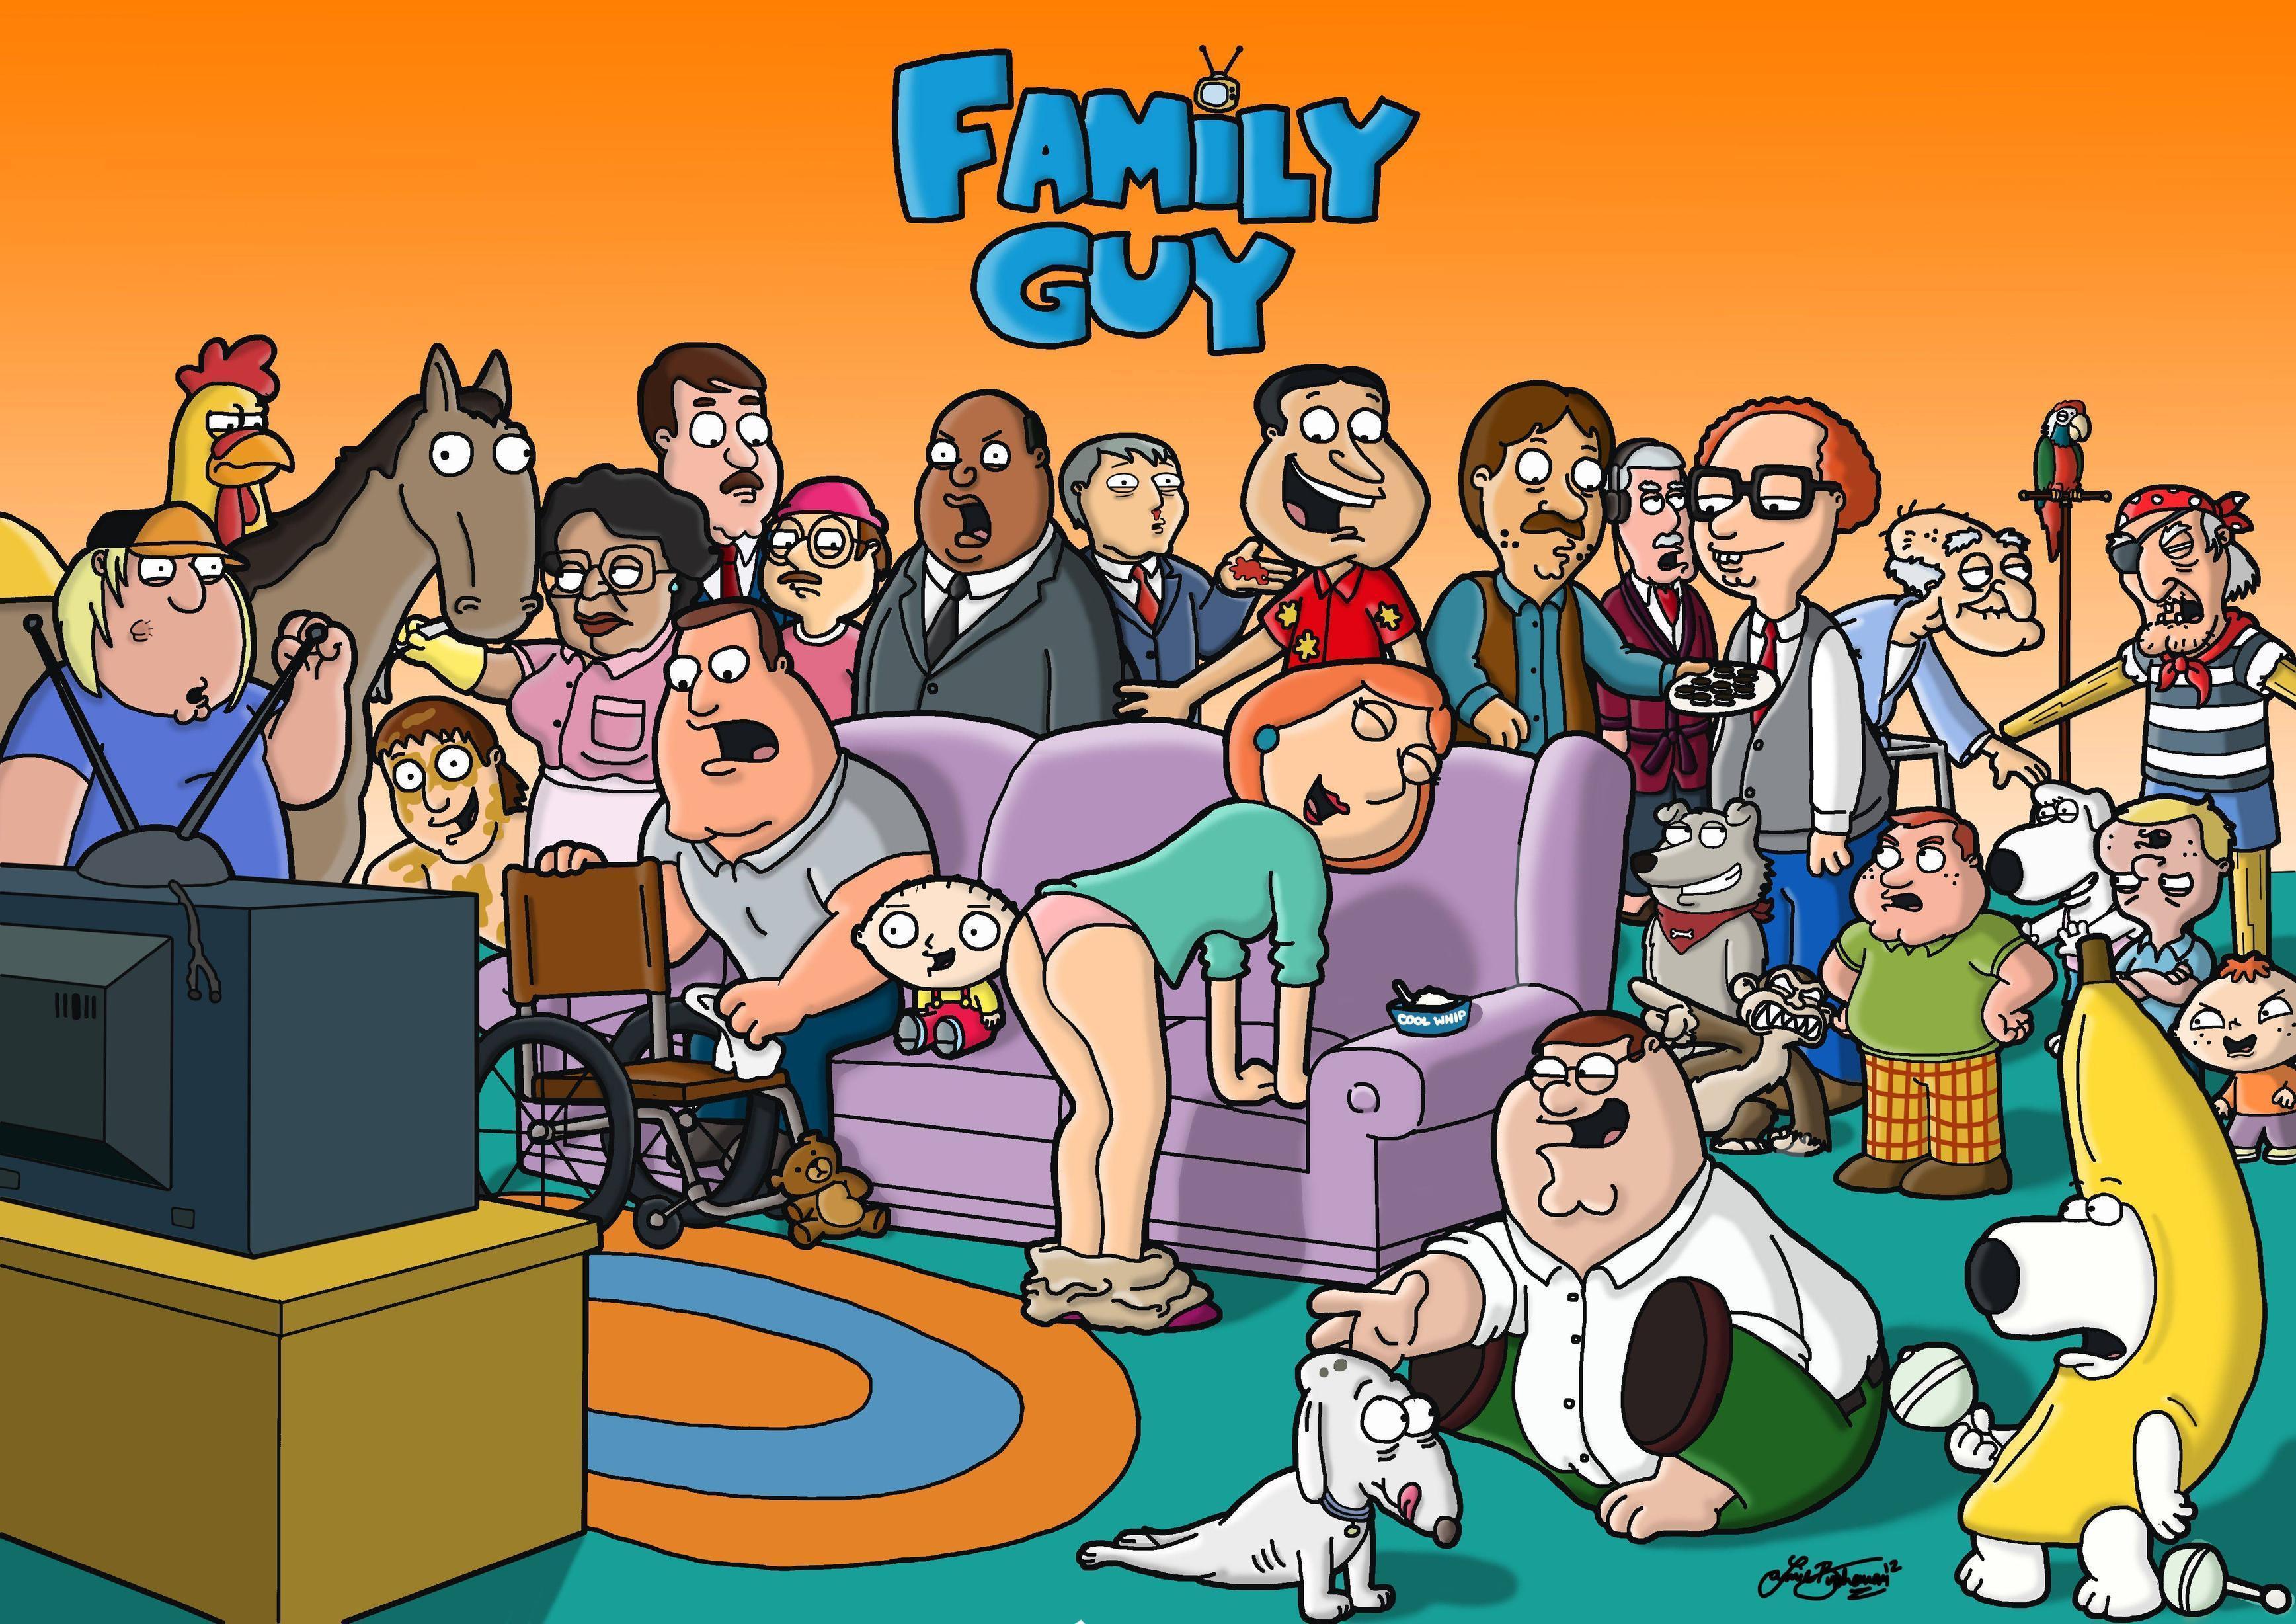 Family Guy Wallpapers For Free, Family Guy, Cartoons